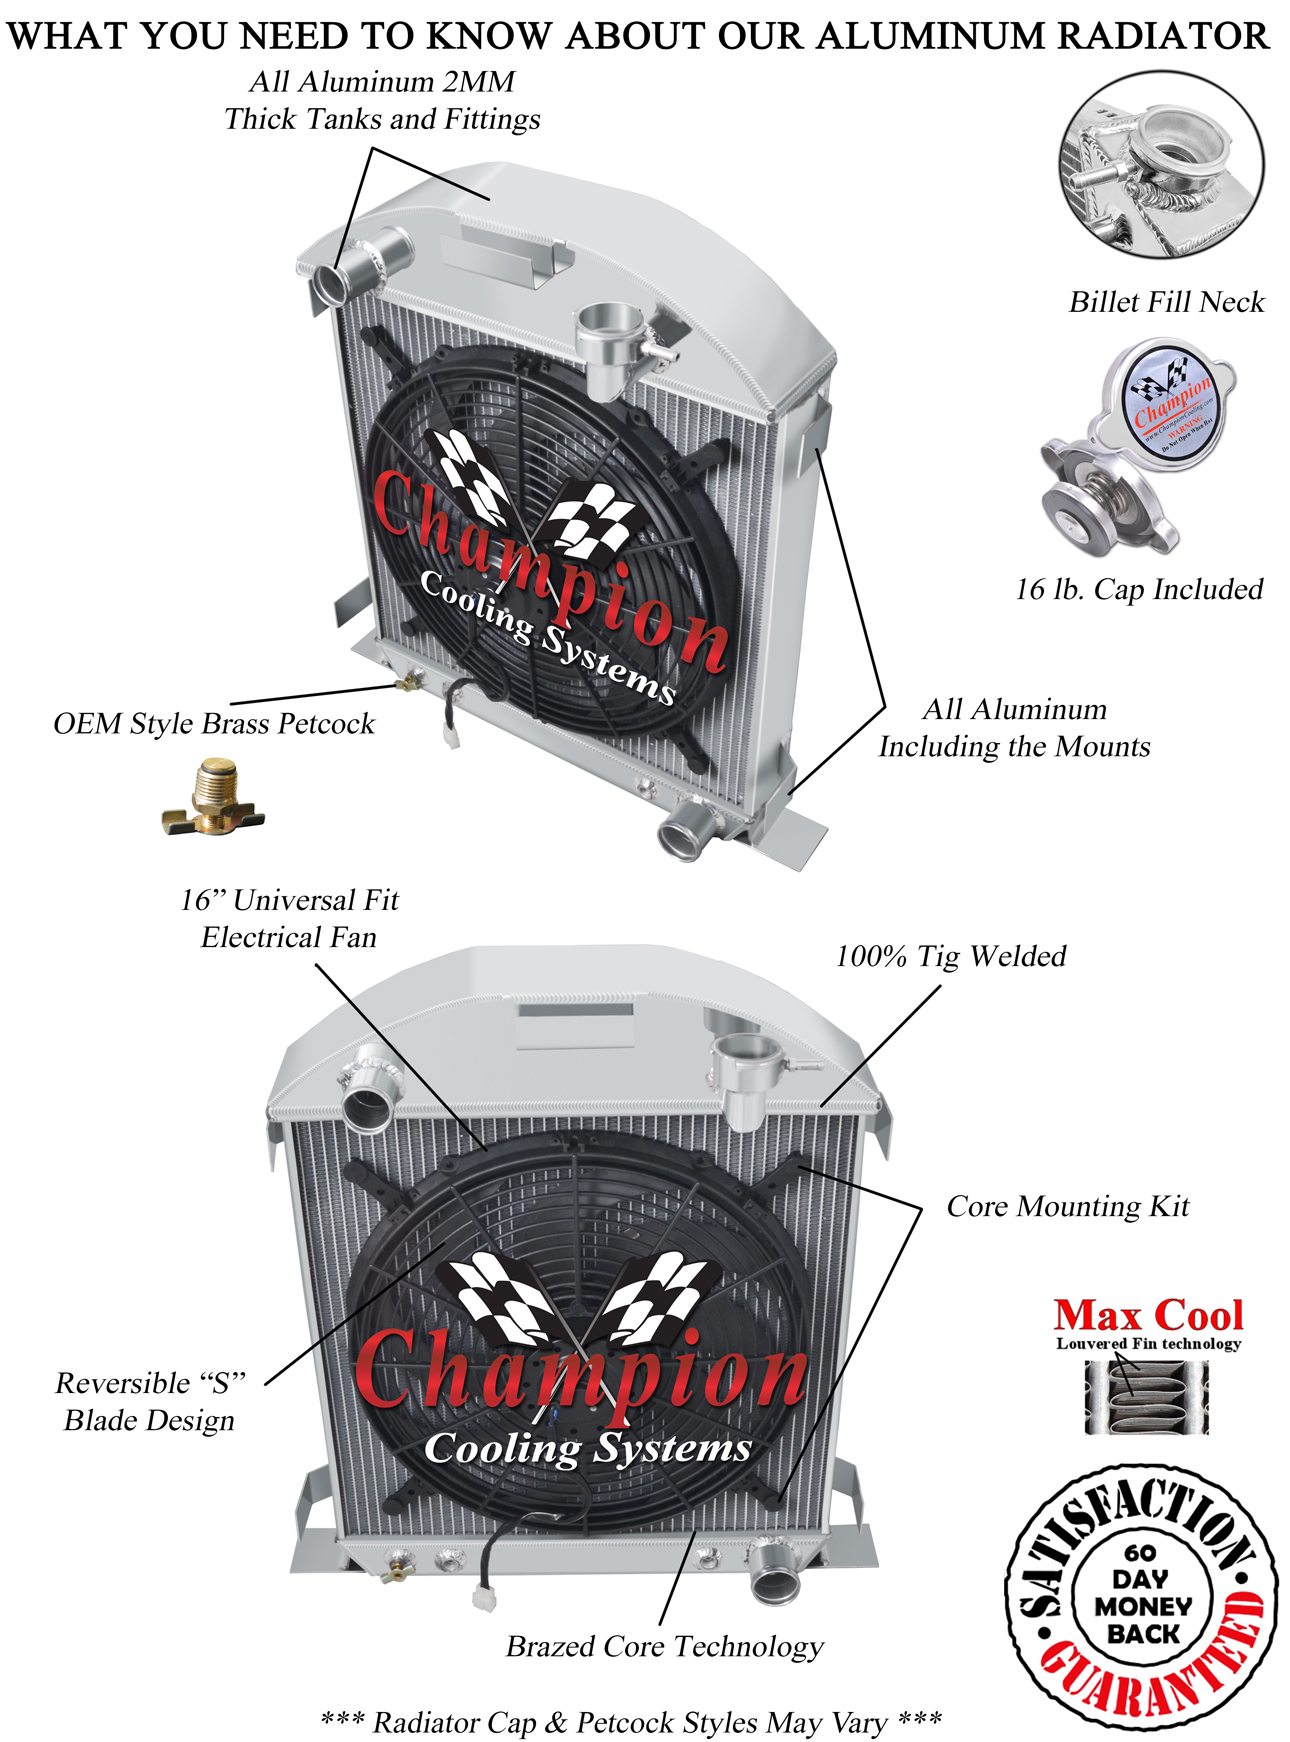 http://www.championcooling.com/photos/Photos%20White/With%20Fans/Combos/2829ch/16/2829ch_1f_d_w.jpg